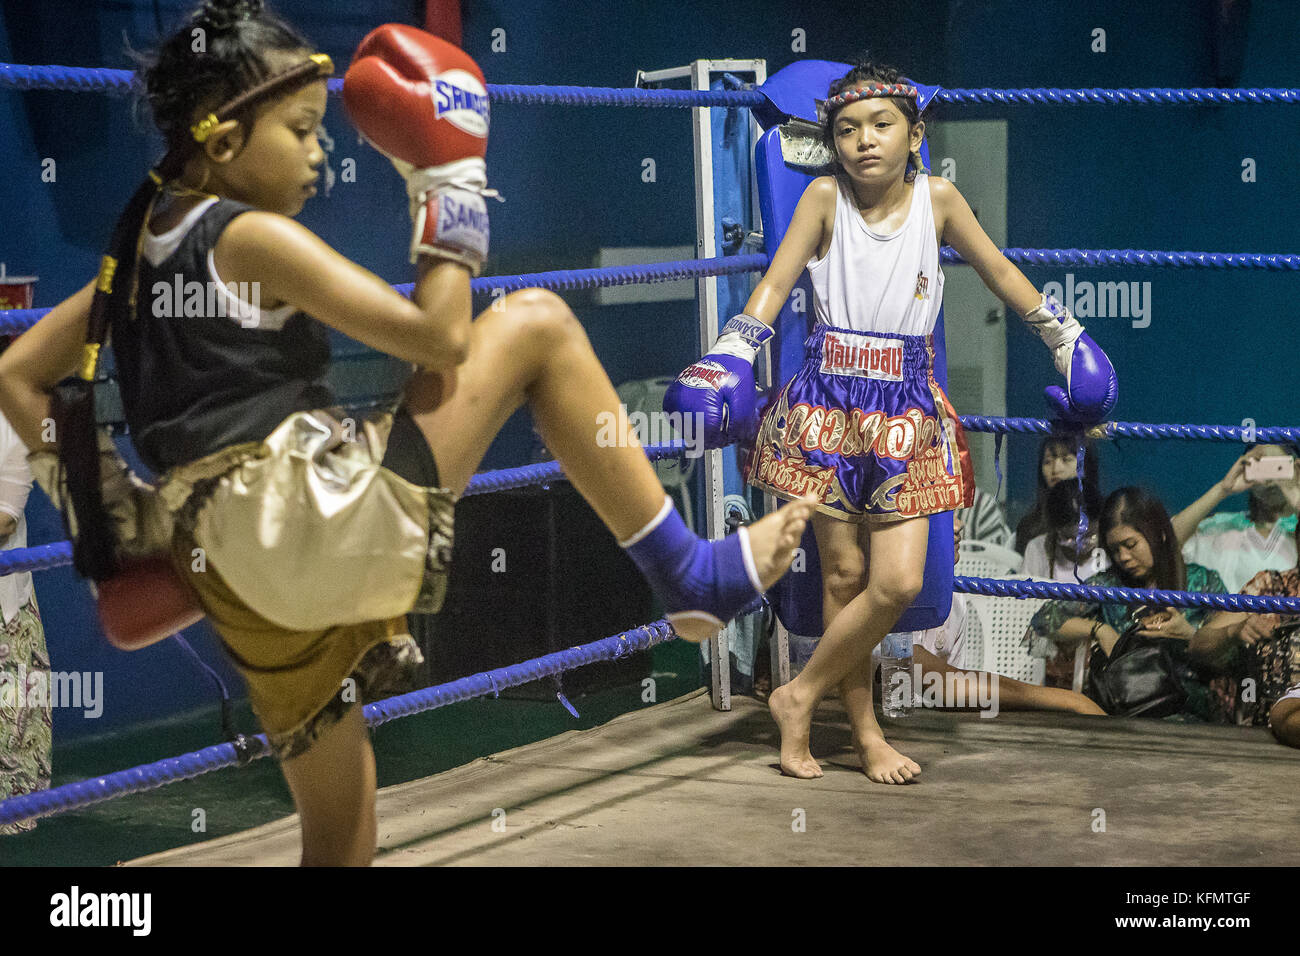 Girls. At right Hasana, 7 years old and 7 matches, Muay Thai fighters going through pre-fight ritual, Thailand Stock Photo